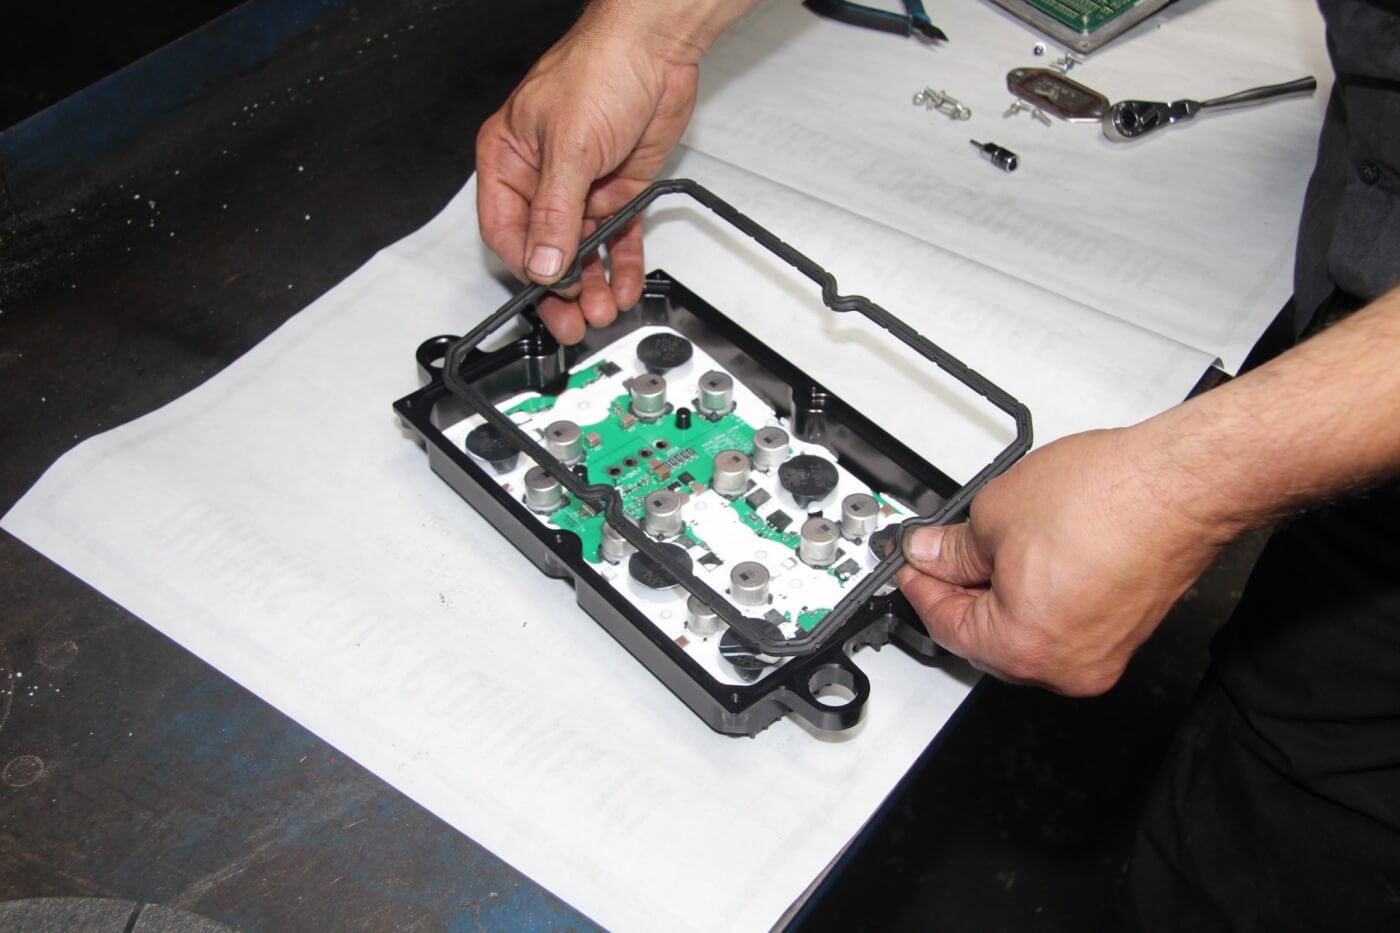 10. When reassembling the FICM with the Bullet Proof power supply, the OEM gasket is reused. 